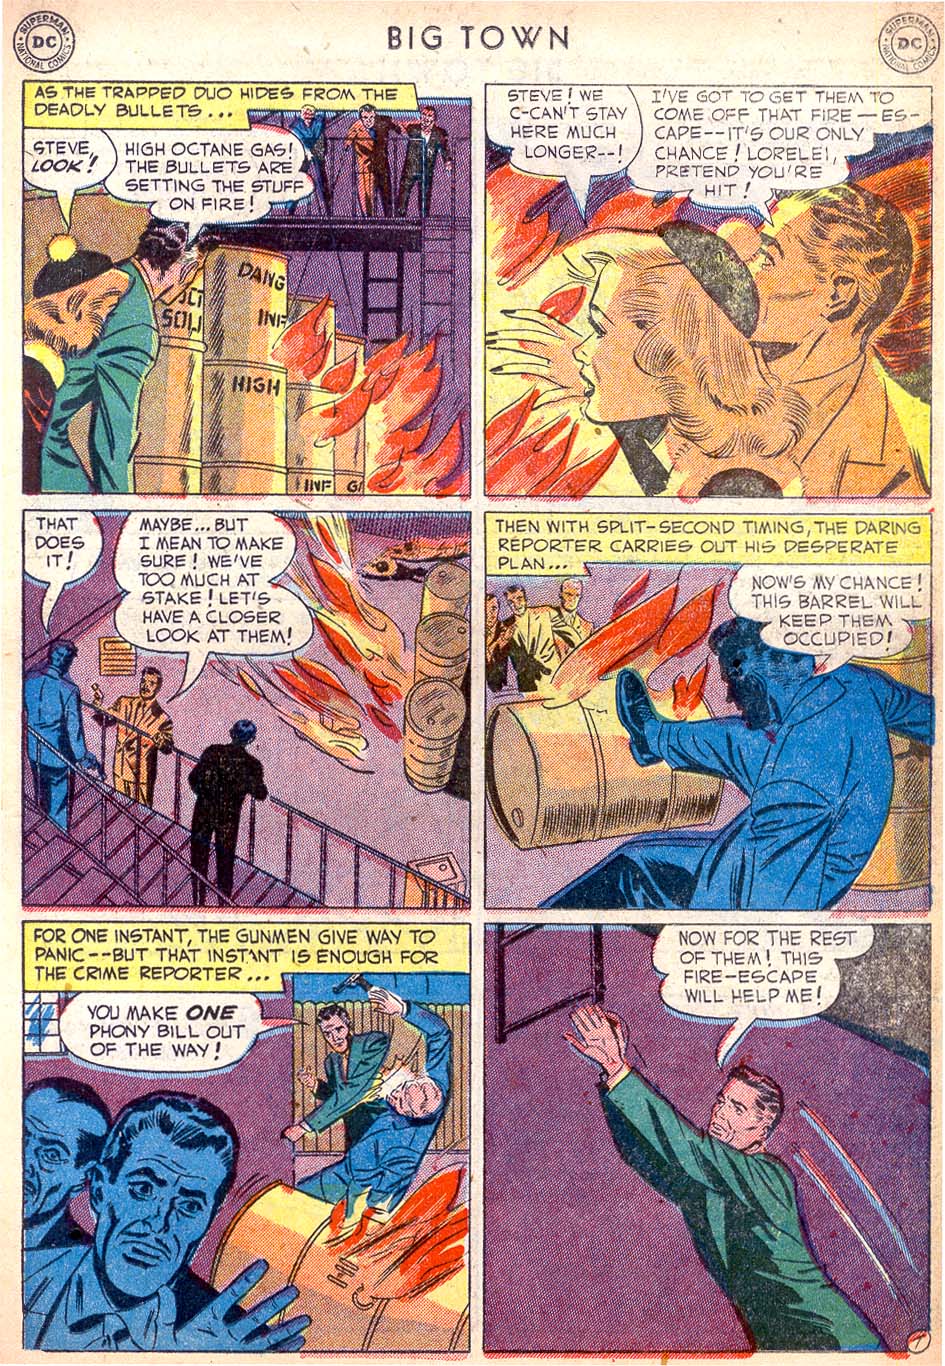 Big Town (1951) 11 Page 20